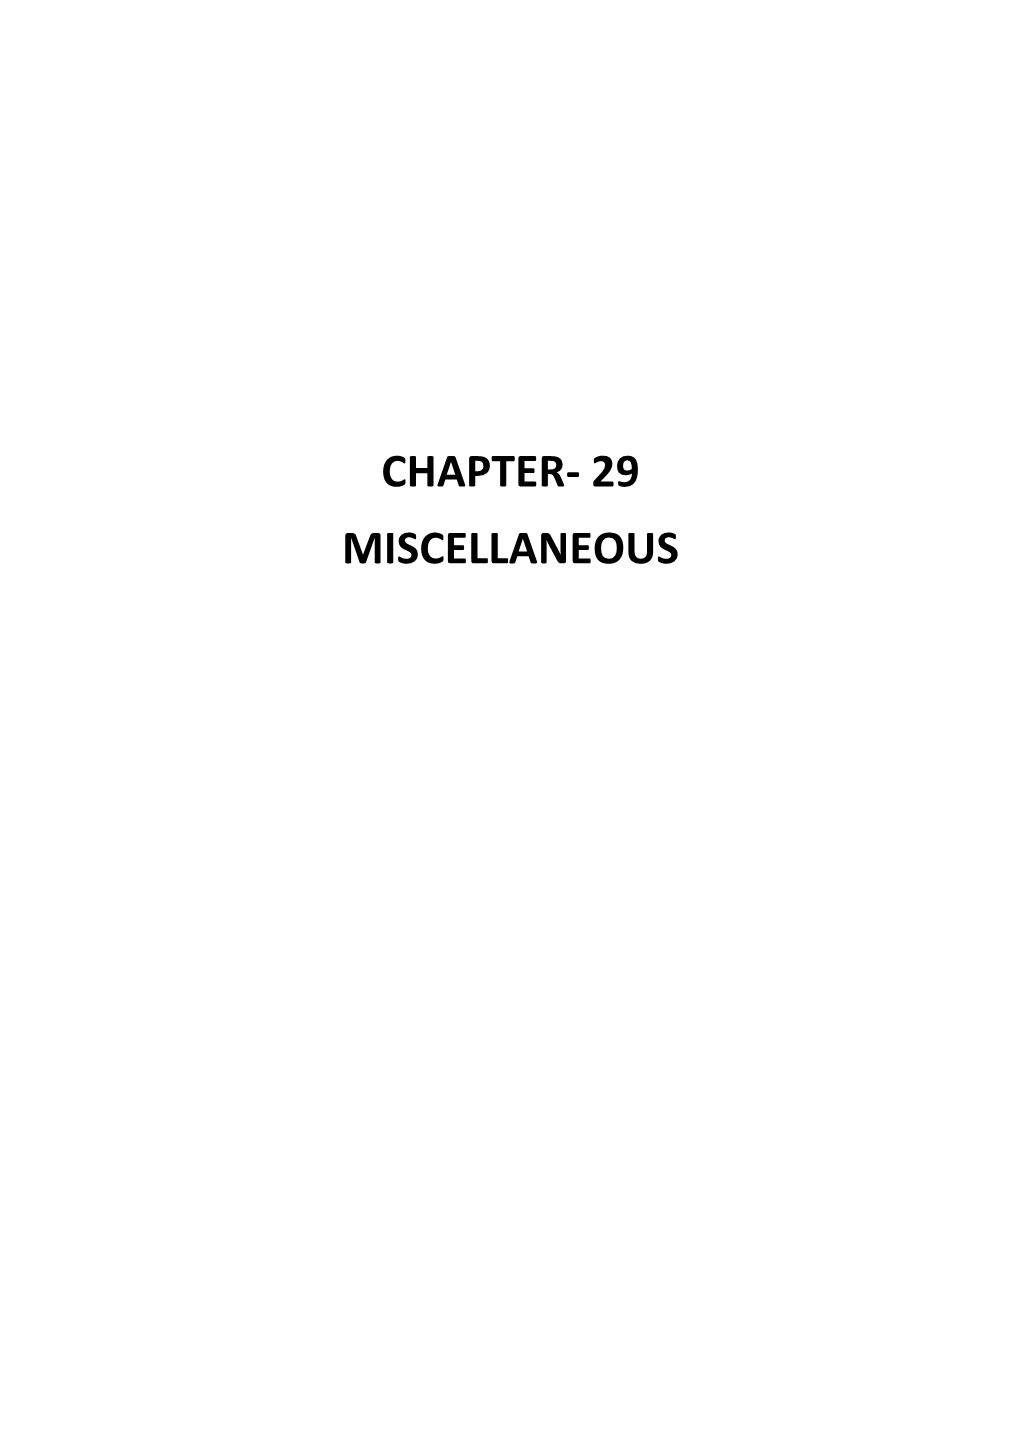 Chapter- 29 Miscellaneous